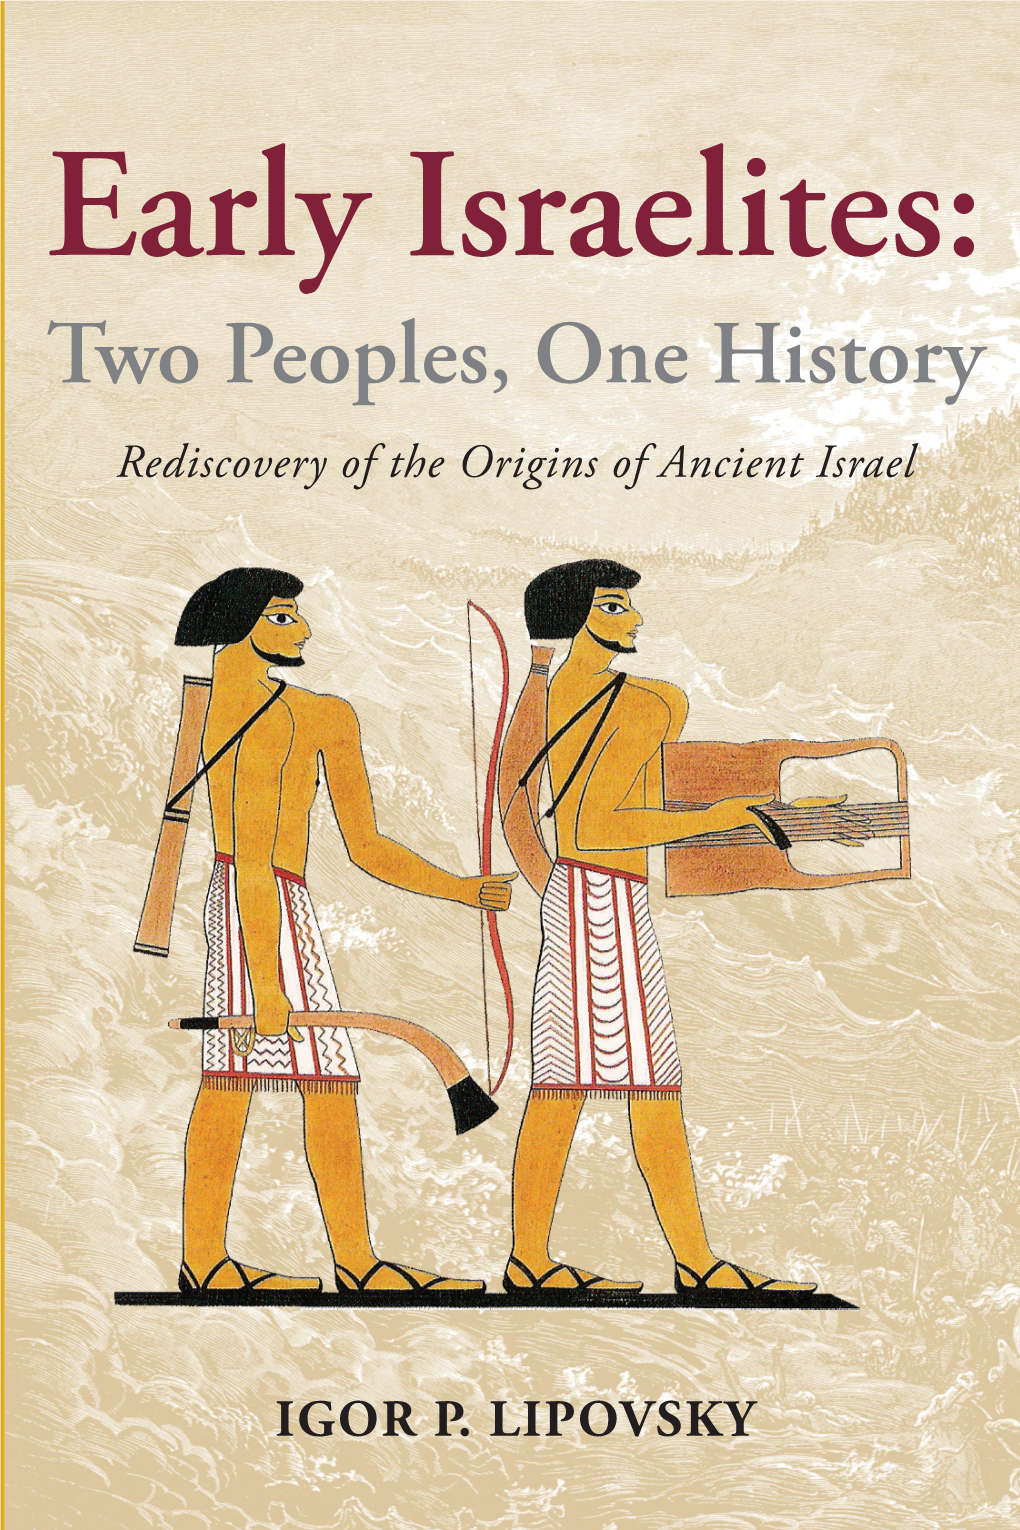 Early Israelites: Two Peoples, One History. Rediscovery of the Origins